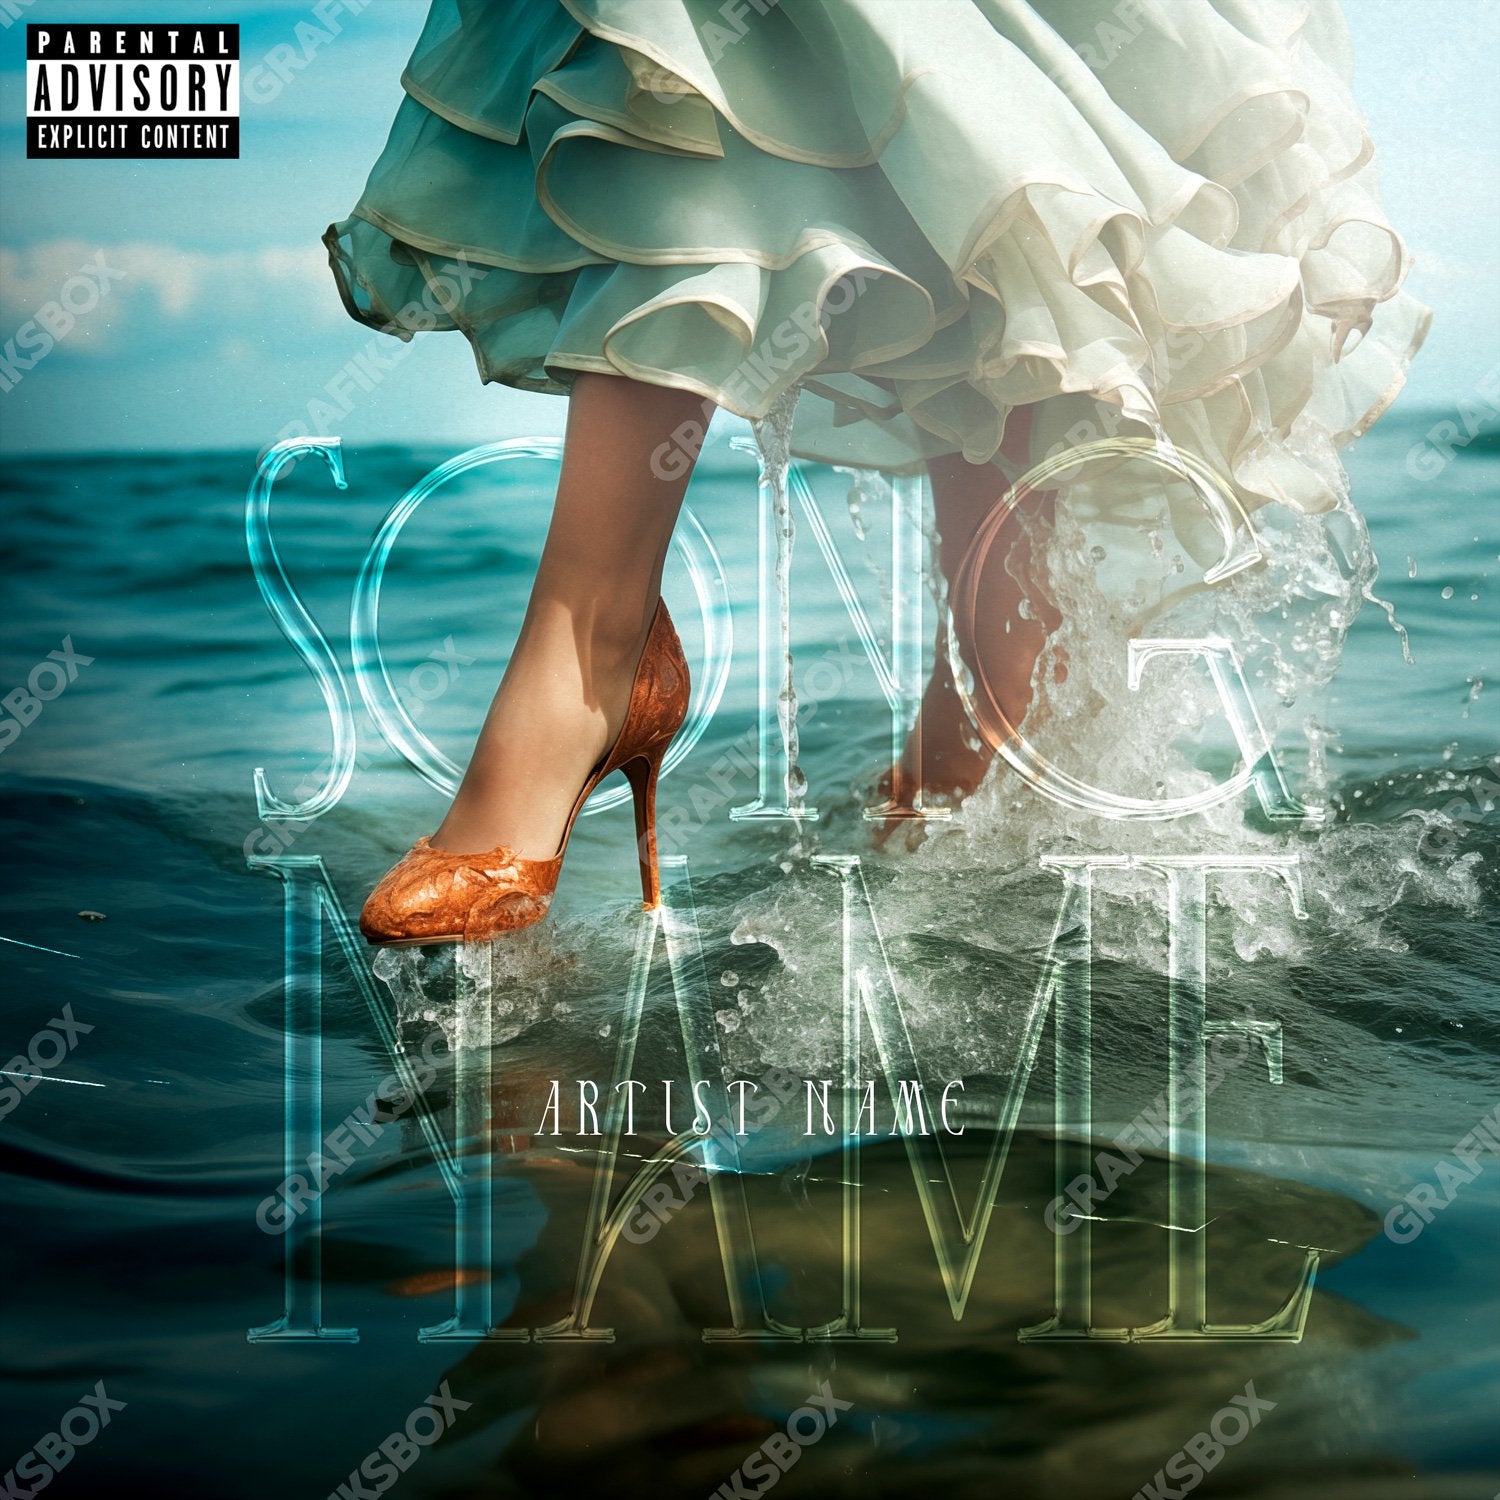 On water premade cover art